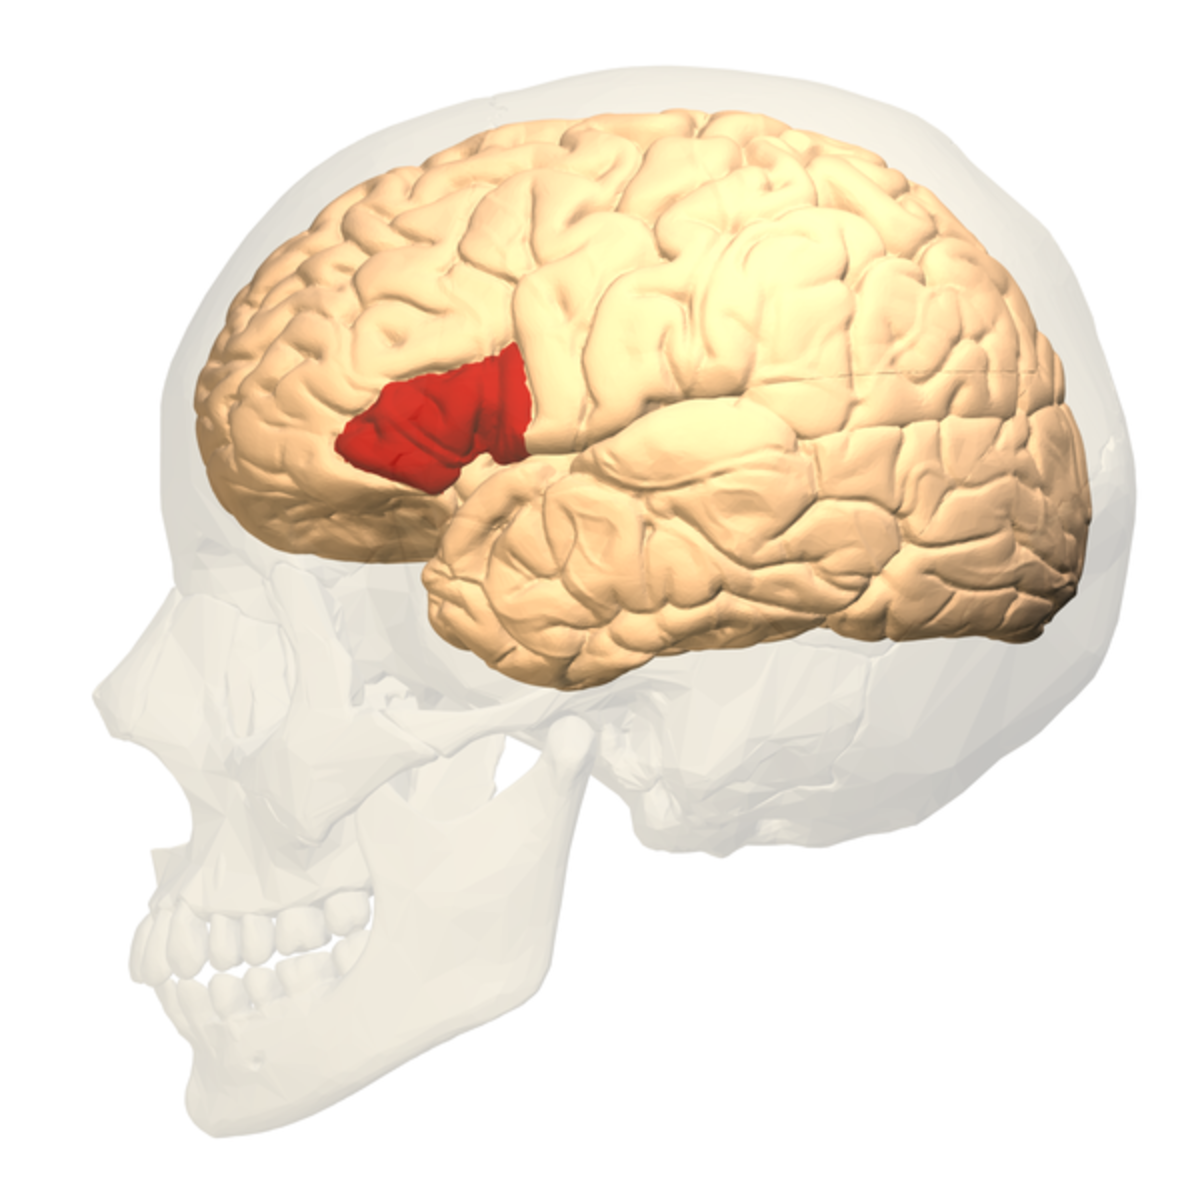 Broca's area (the red patch) is located in a frontal lobe of the cerebrum.